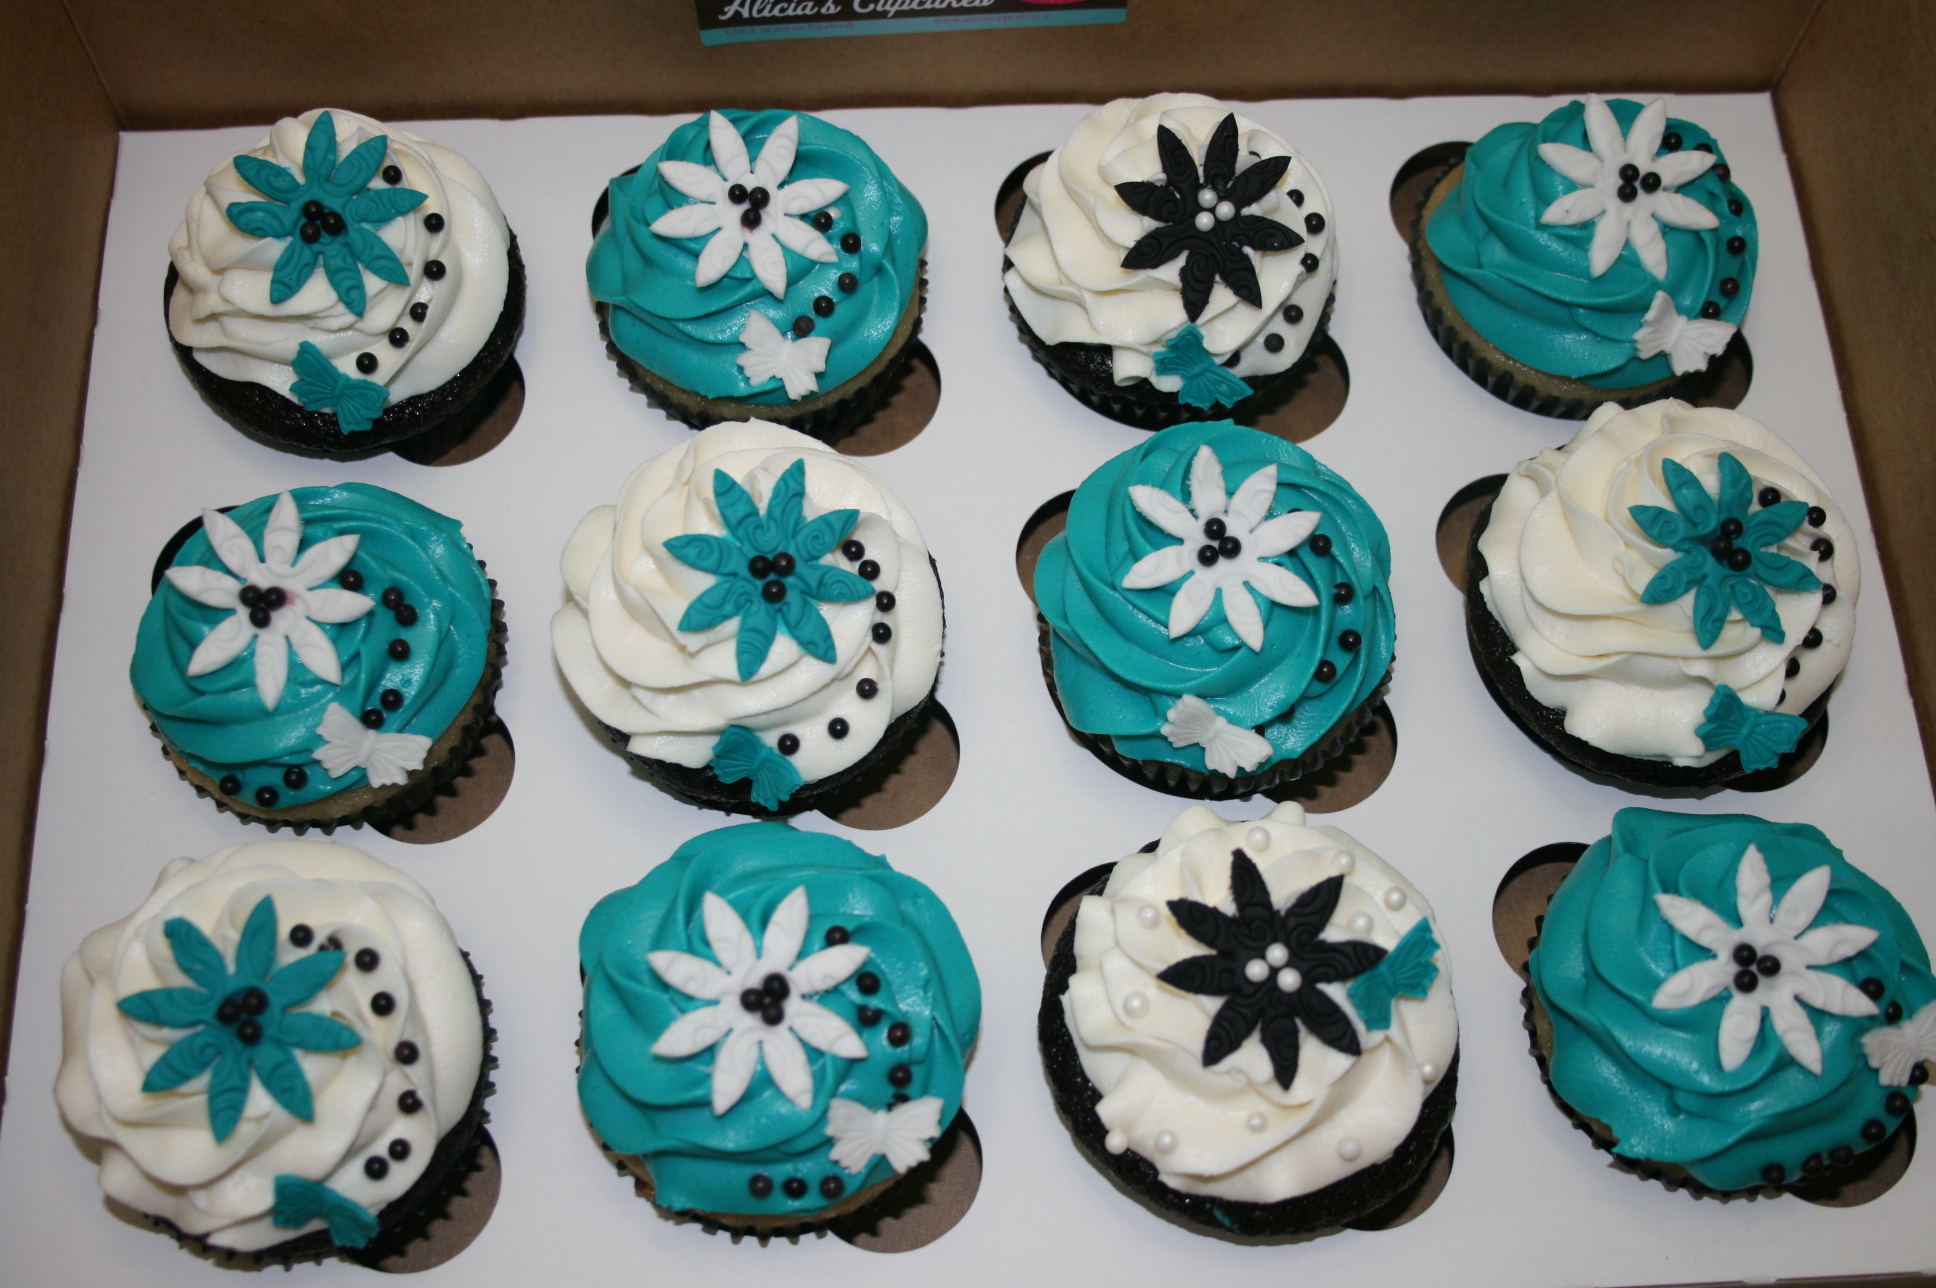 Turquoise and Black Cupcakes